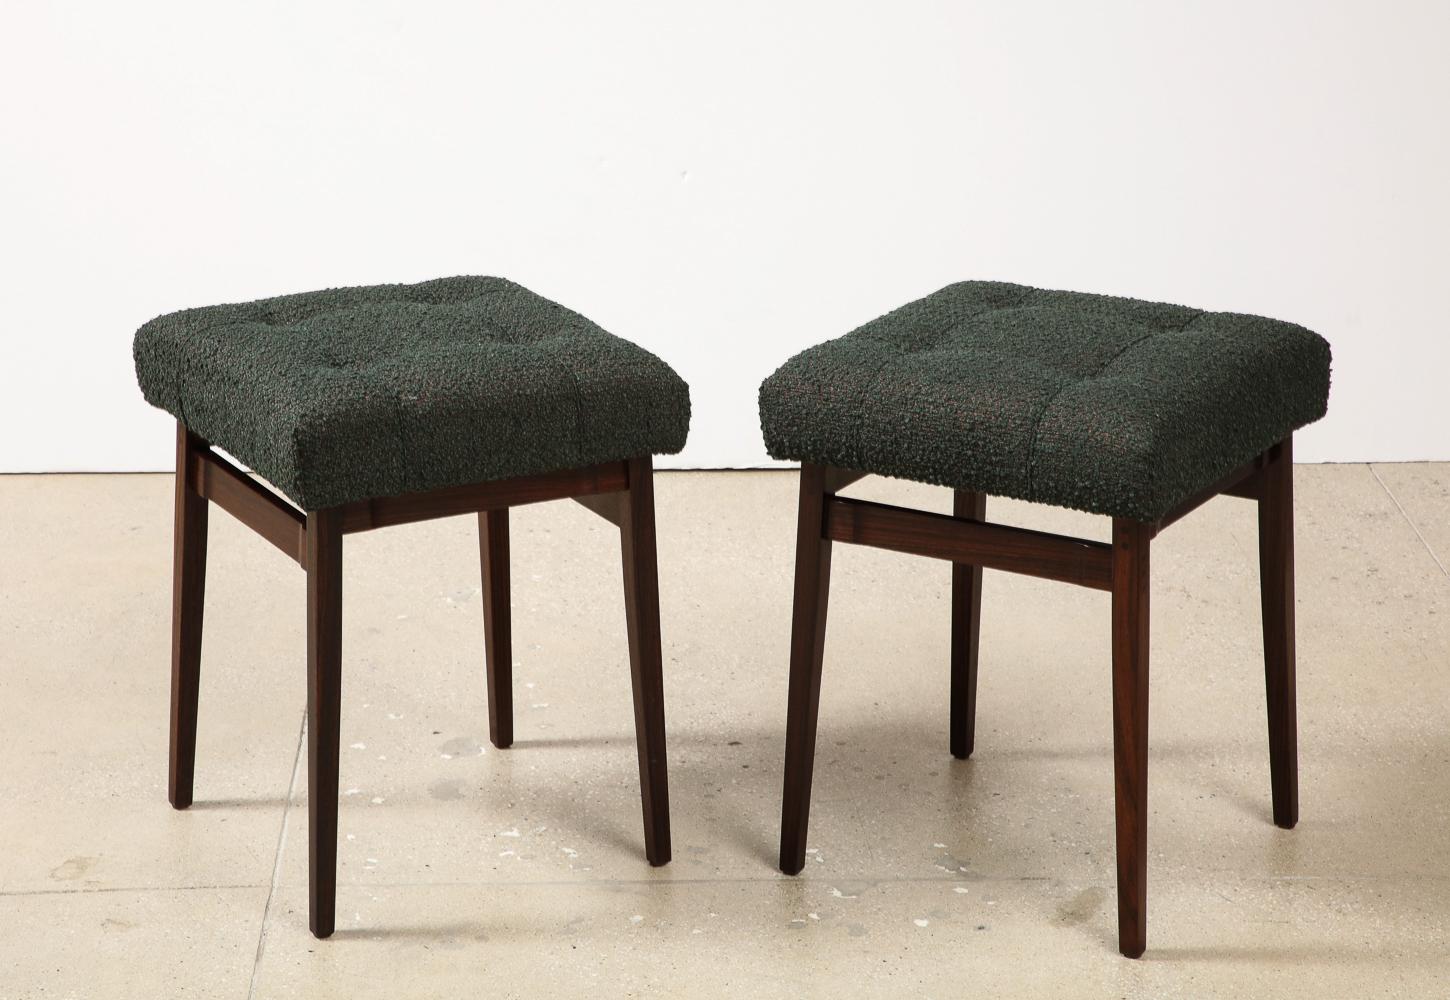 Pair of Upholstered Stools by Gianfranco Frattini for Cassina.  Rosewood, fabric. Great architectural design that was originally offered in 3 different heights. This model was used extensively in Gio Ponti's iconic Parco dei Principe Hotels. Price